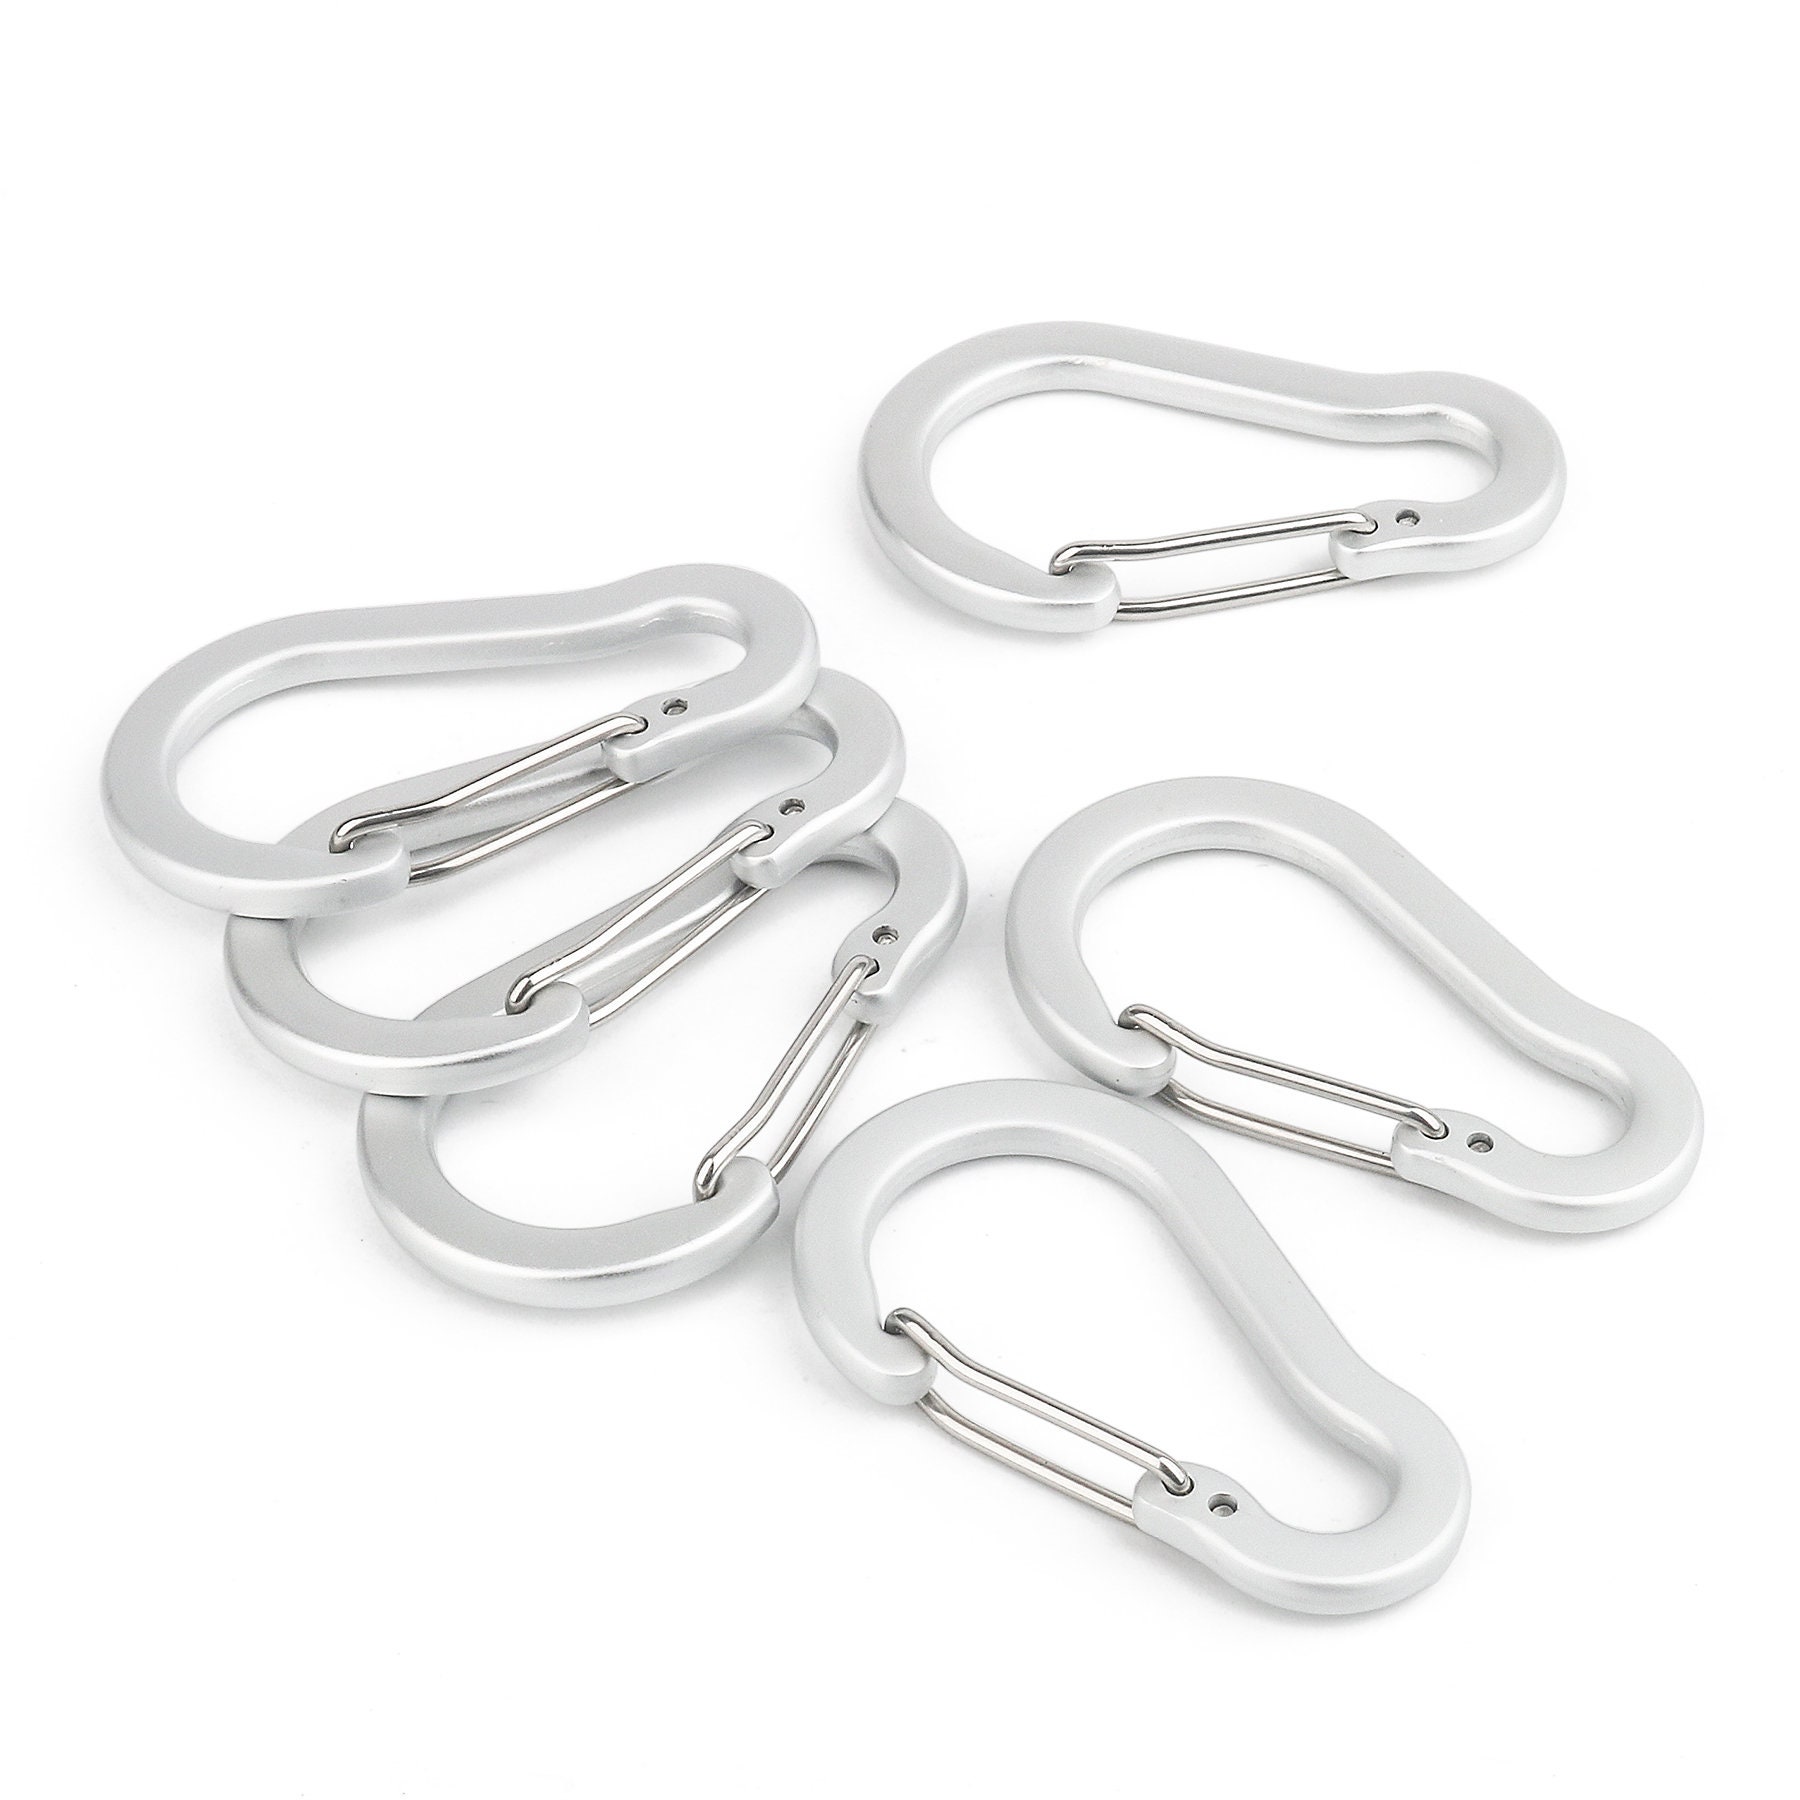 10pcs S Biner Carabiner,40mmx18mm Black Alloy Carabiner Clip,dual Gated  Spring Snap Hook Clasp Key Ring for Rock Climbing Gifts 